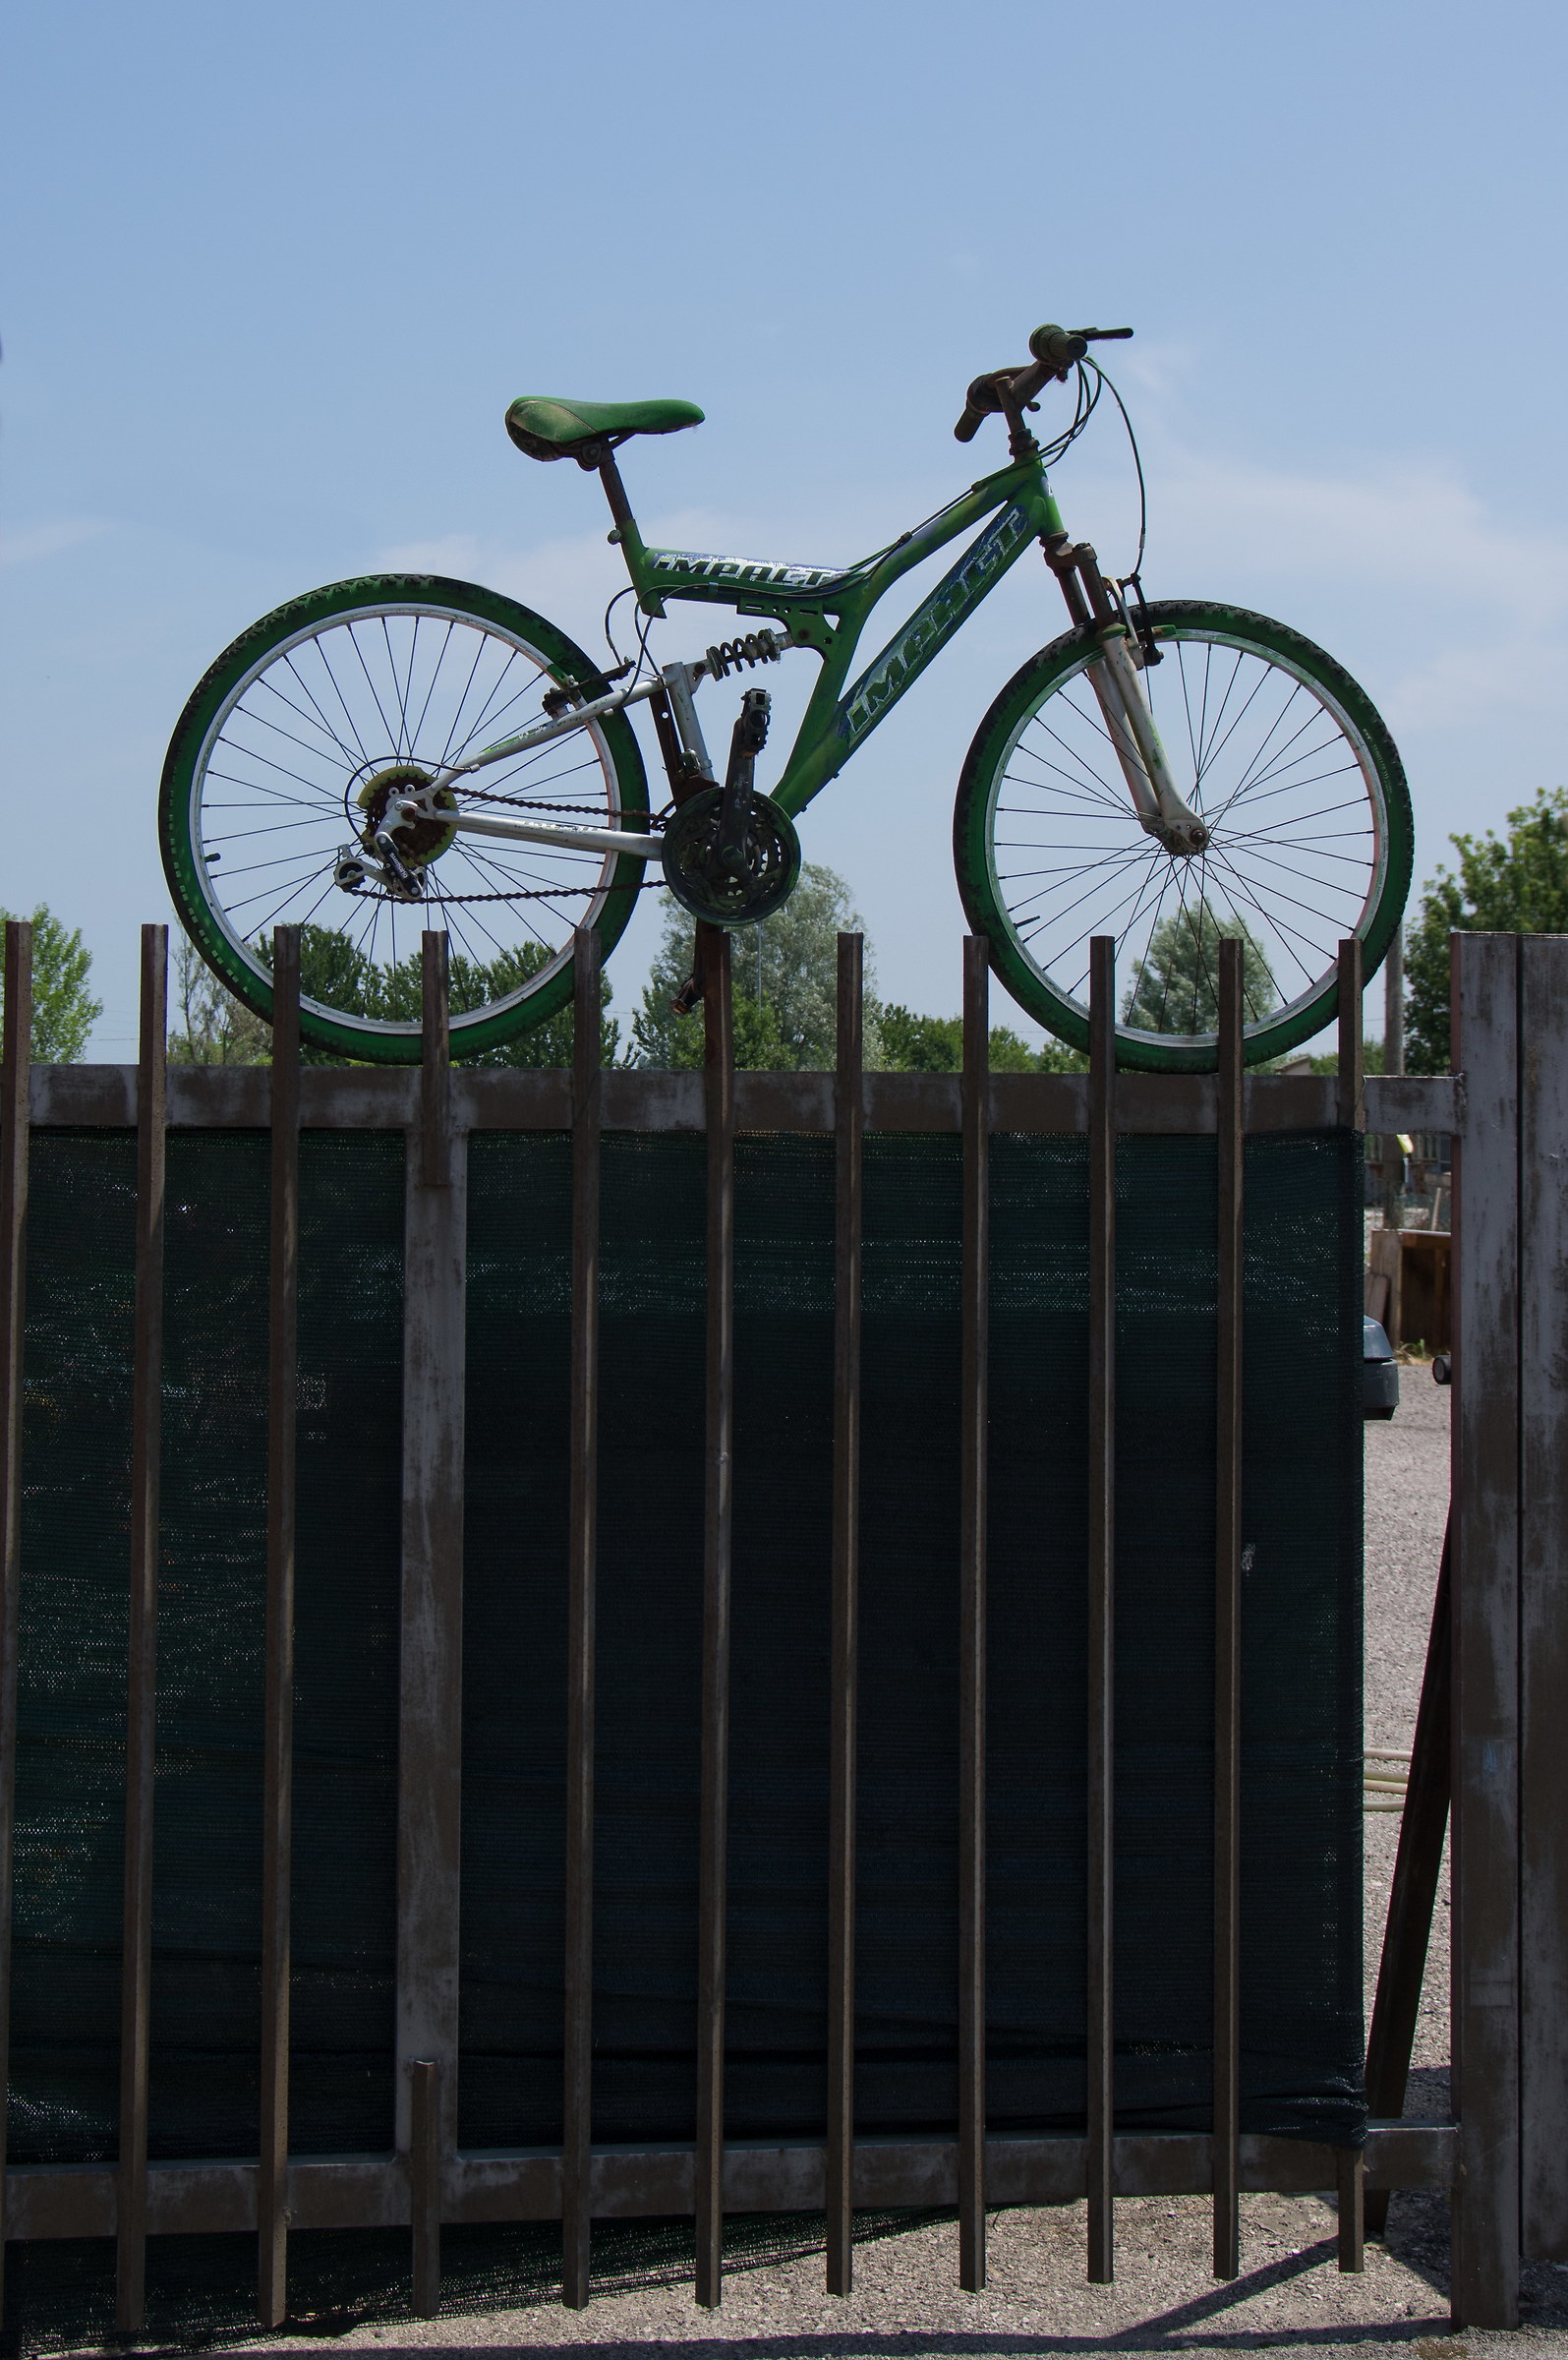 The Bicycle Fence...